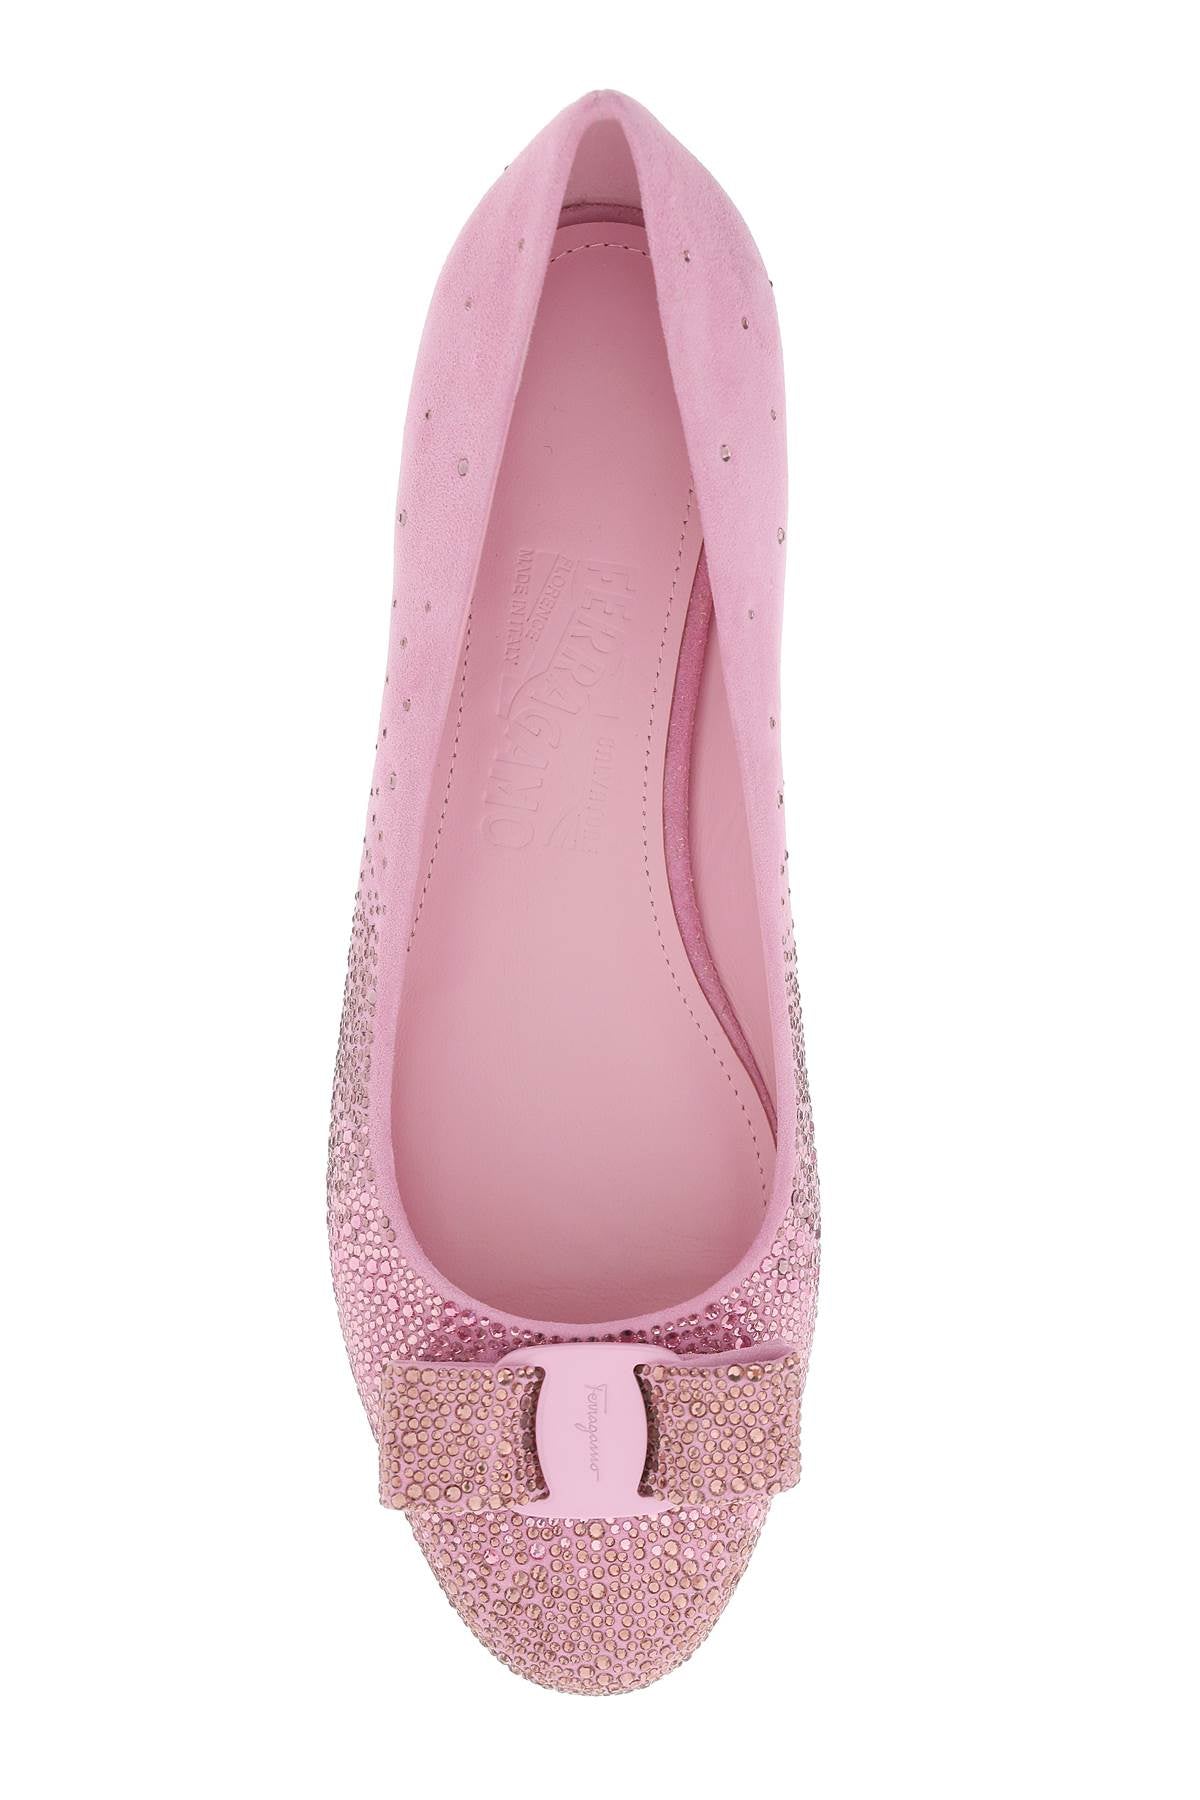 FERRAGAMO Pink Suede Dégradé Ballerina Flats with Vara Bow and Crystals for Women